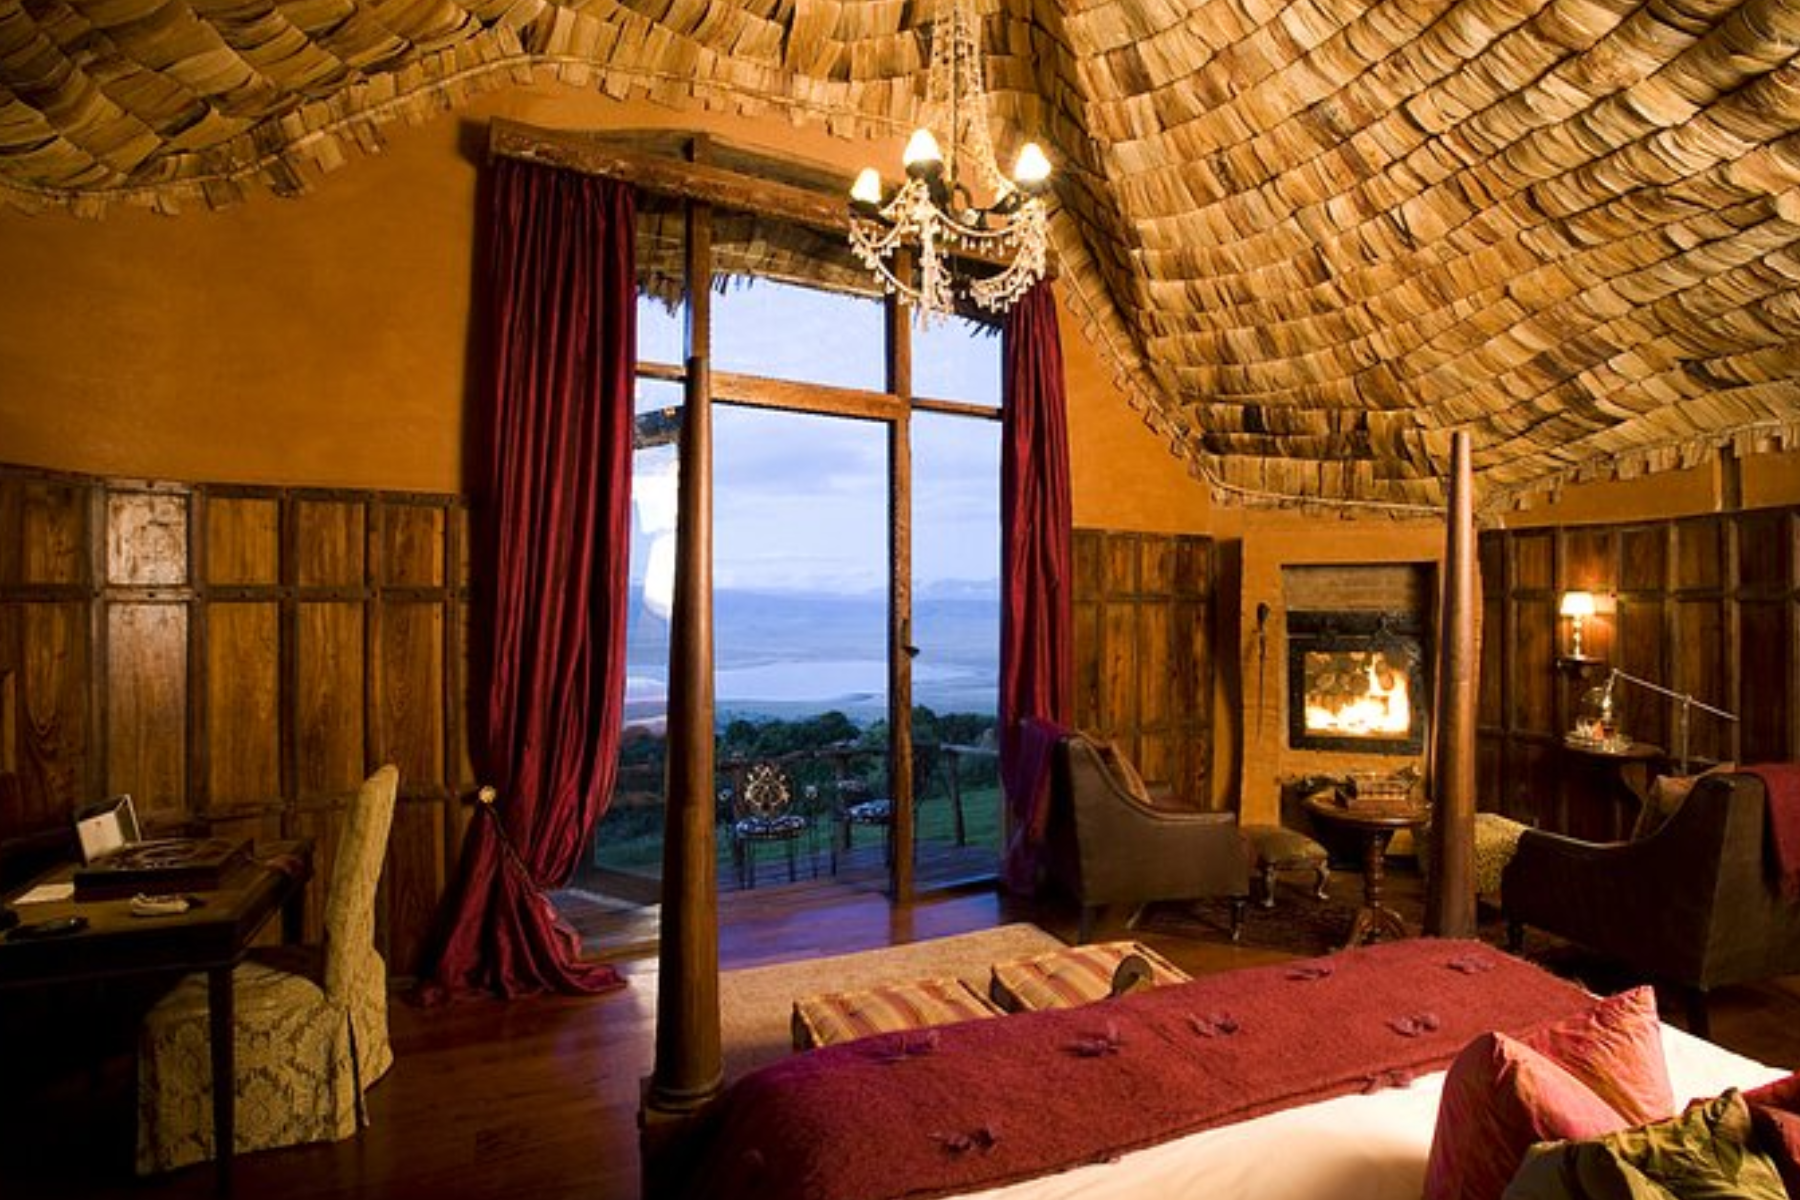 The interior of Ngorongoro Crater Lodge, complete with a bed